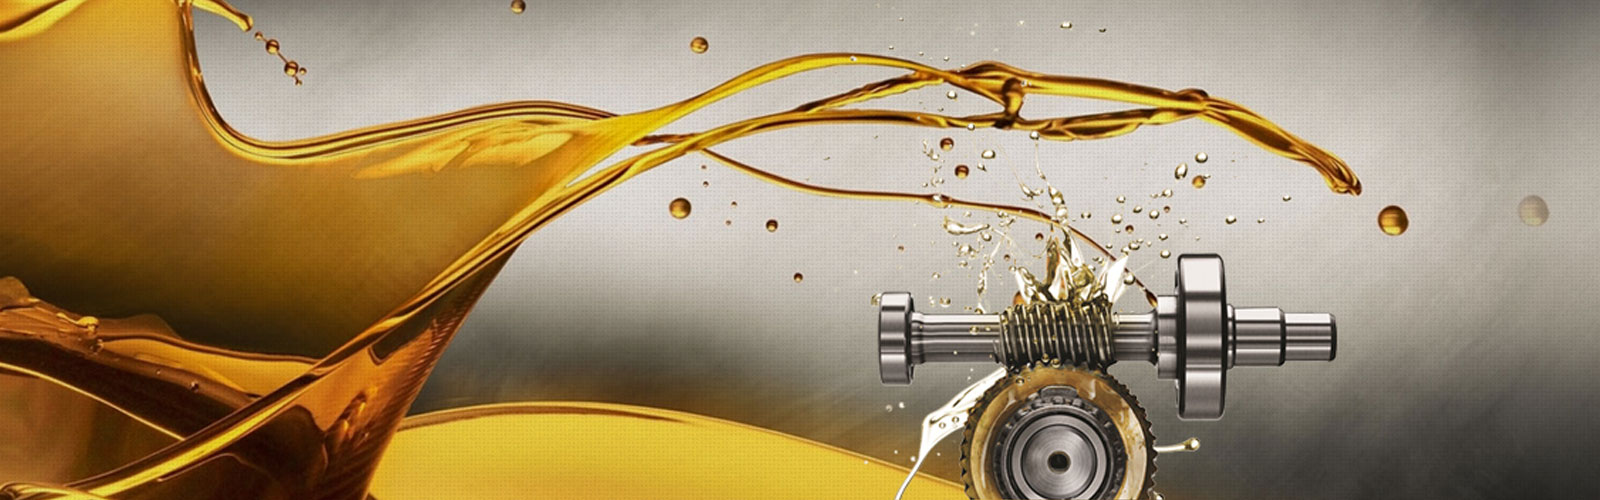 Engine Oil Product